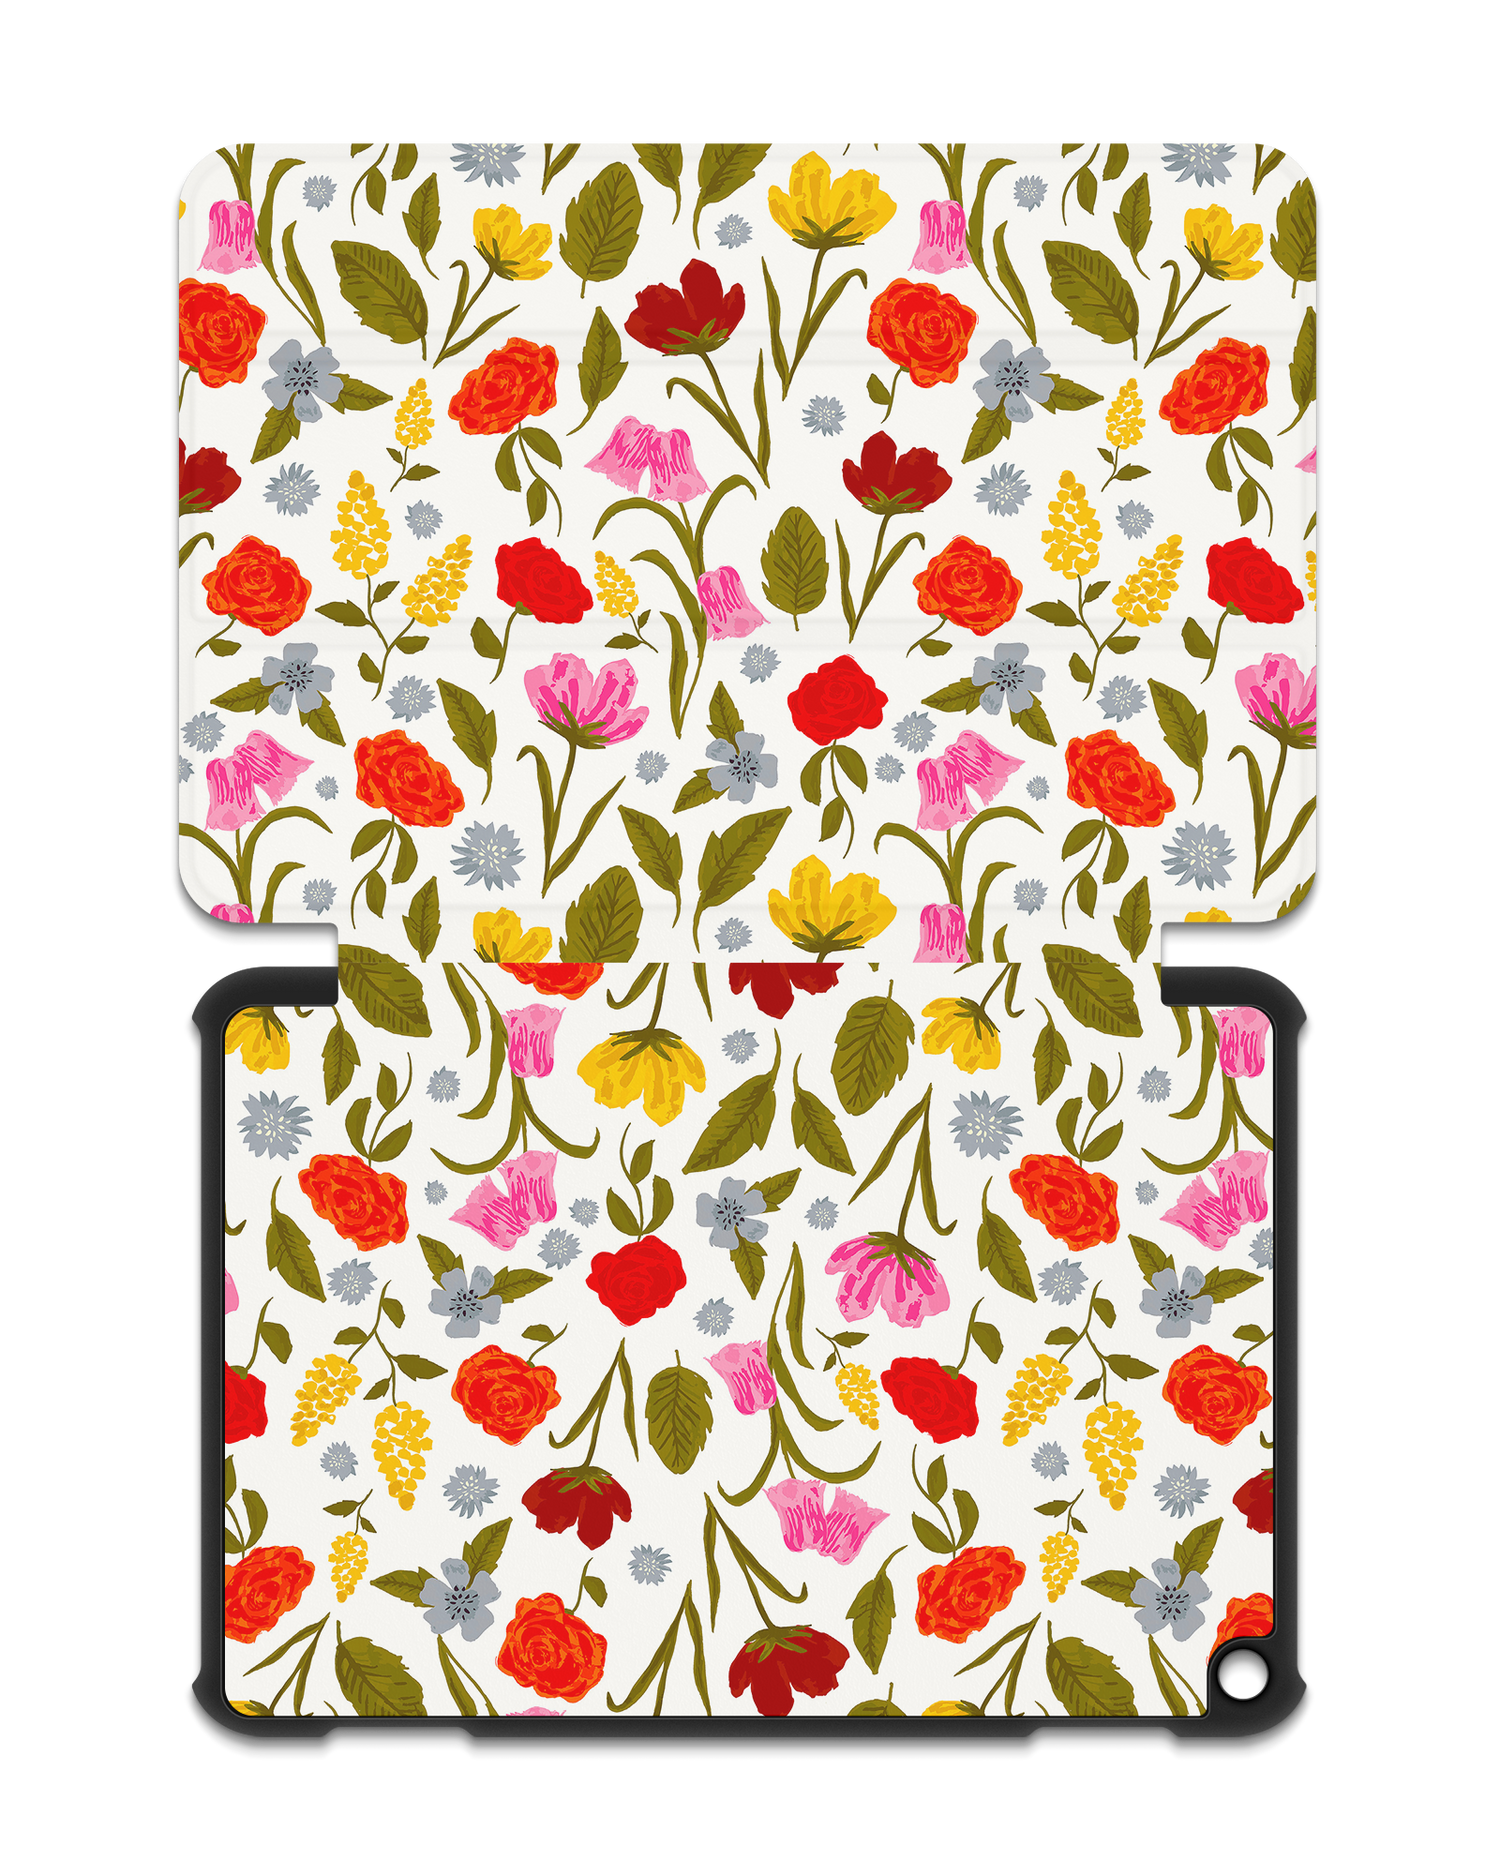 Botanical Beauties Tablet Smart Case for Amazon Fire HD 8 (2022), Amazon Fire HD 8 Plus (2022), Amazon Fire HD 8 (2020), Amazon Fire HD 8 Plus (2020): Opened